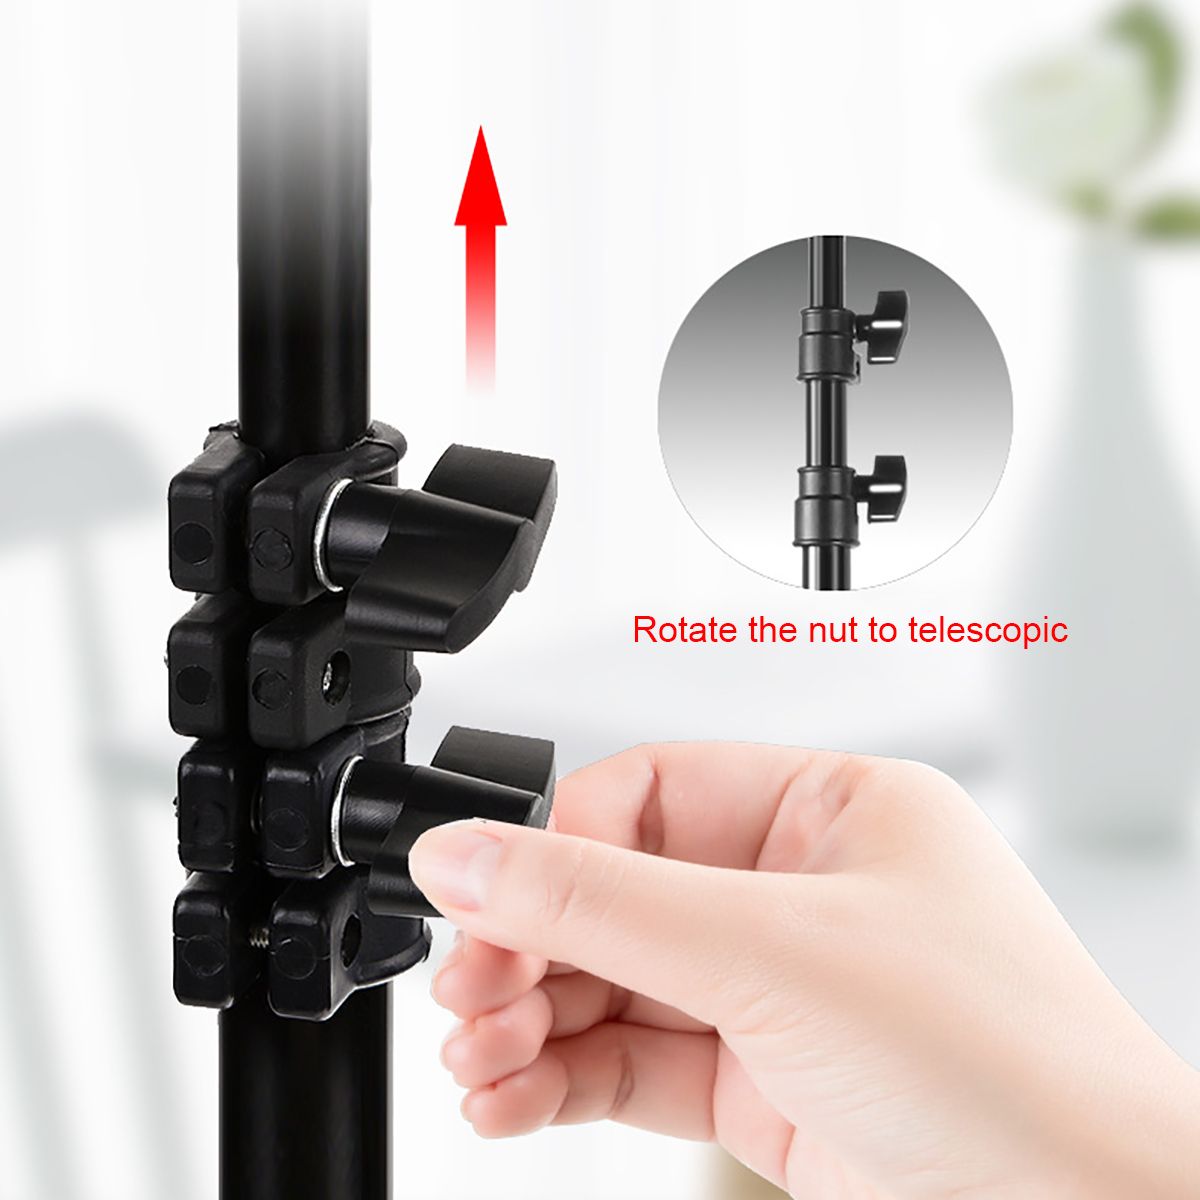 1625cm-Dimmable-LED-Video-Ring-Light-Tripod-Stand-with-PhoneMic-Holder-bluetooth-Selfie-Shutter-for--1610611